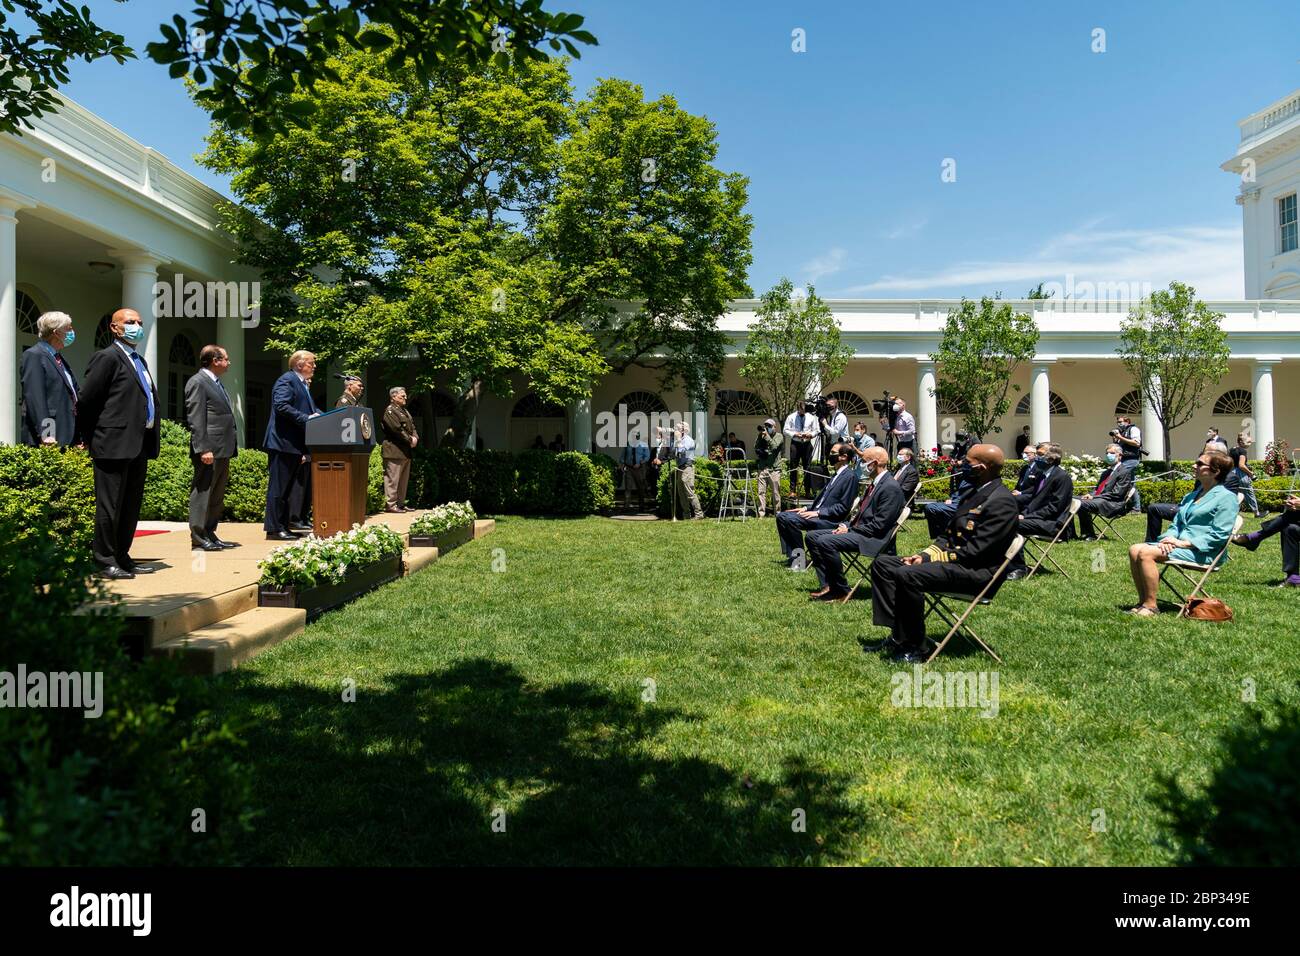 U.S. President Donald Trump, discusses COVID-19 vaccine development in the Rose Garden of the White House May 15, 2020 in Washington, D.C. Stock Photo